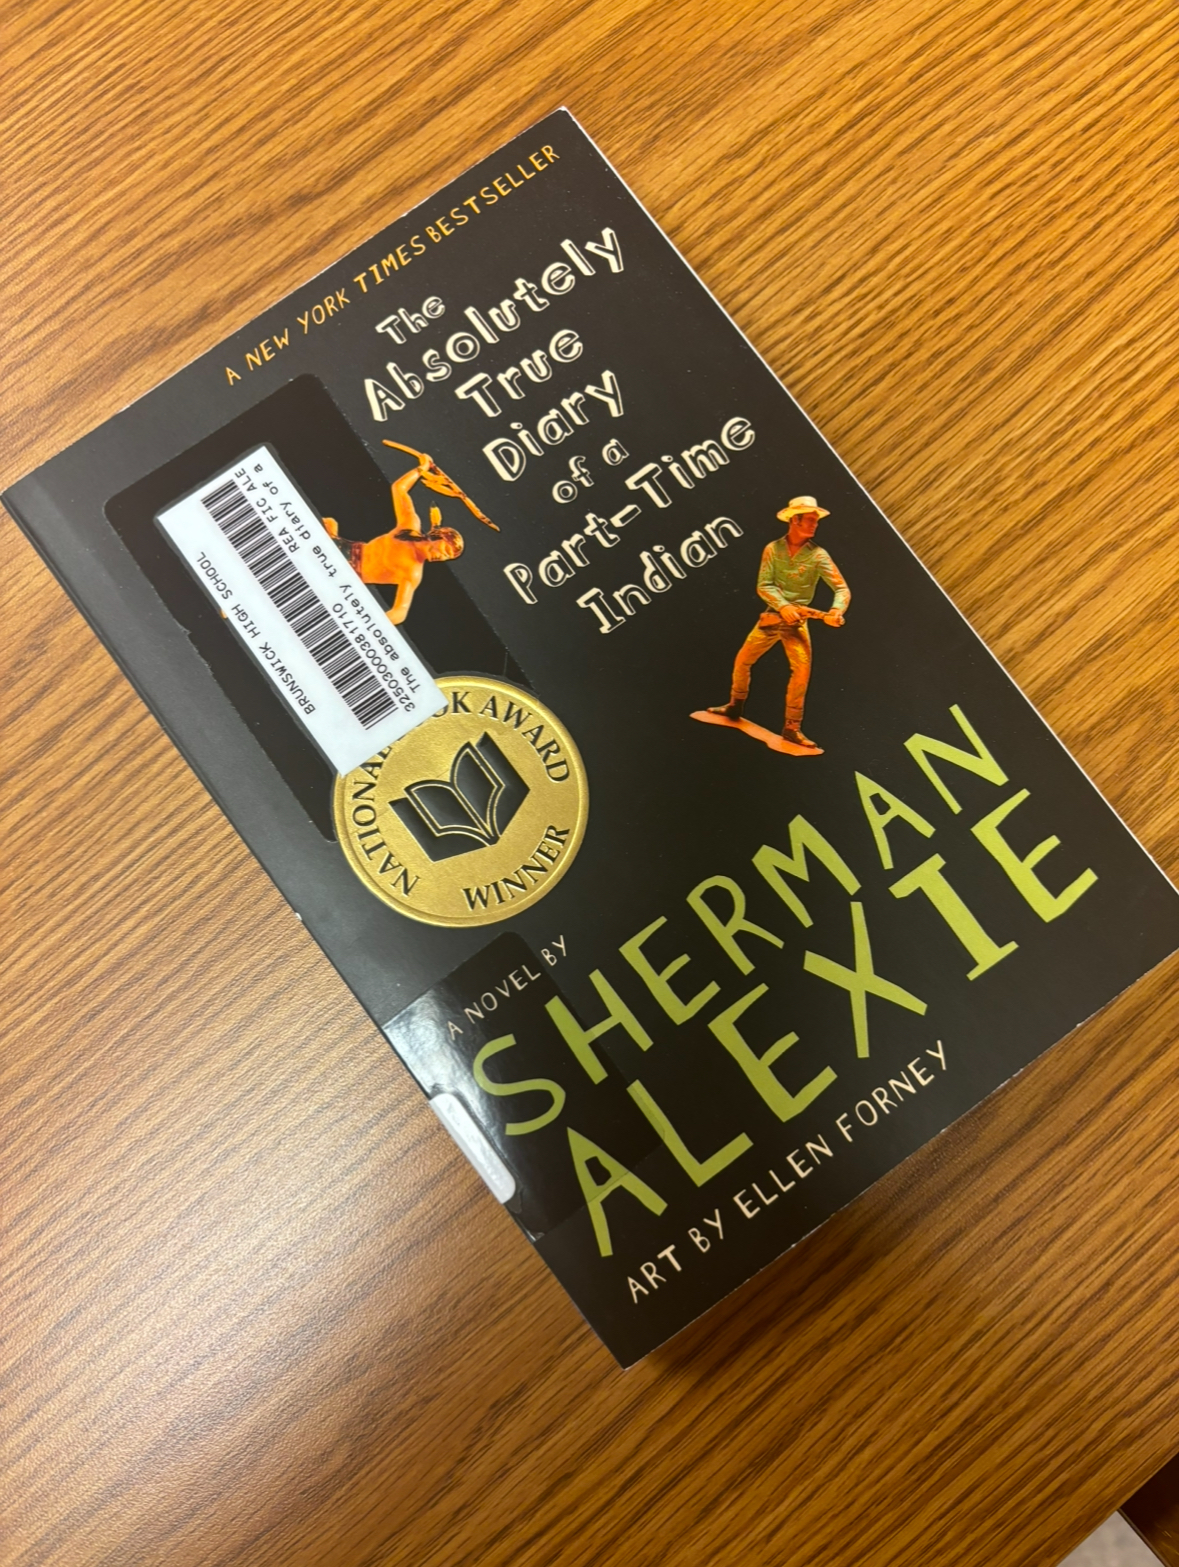 The Absolutely True Diary of a Part-Time Indian by Sherman Alexie.